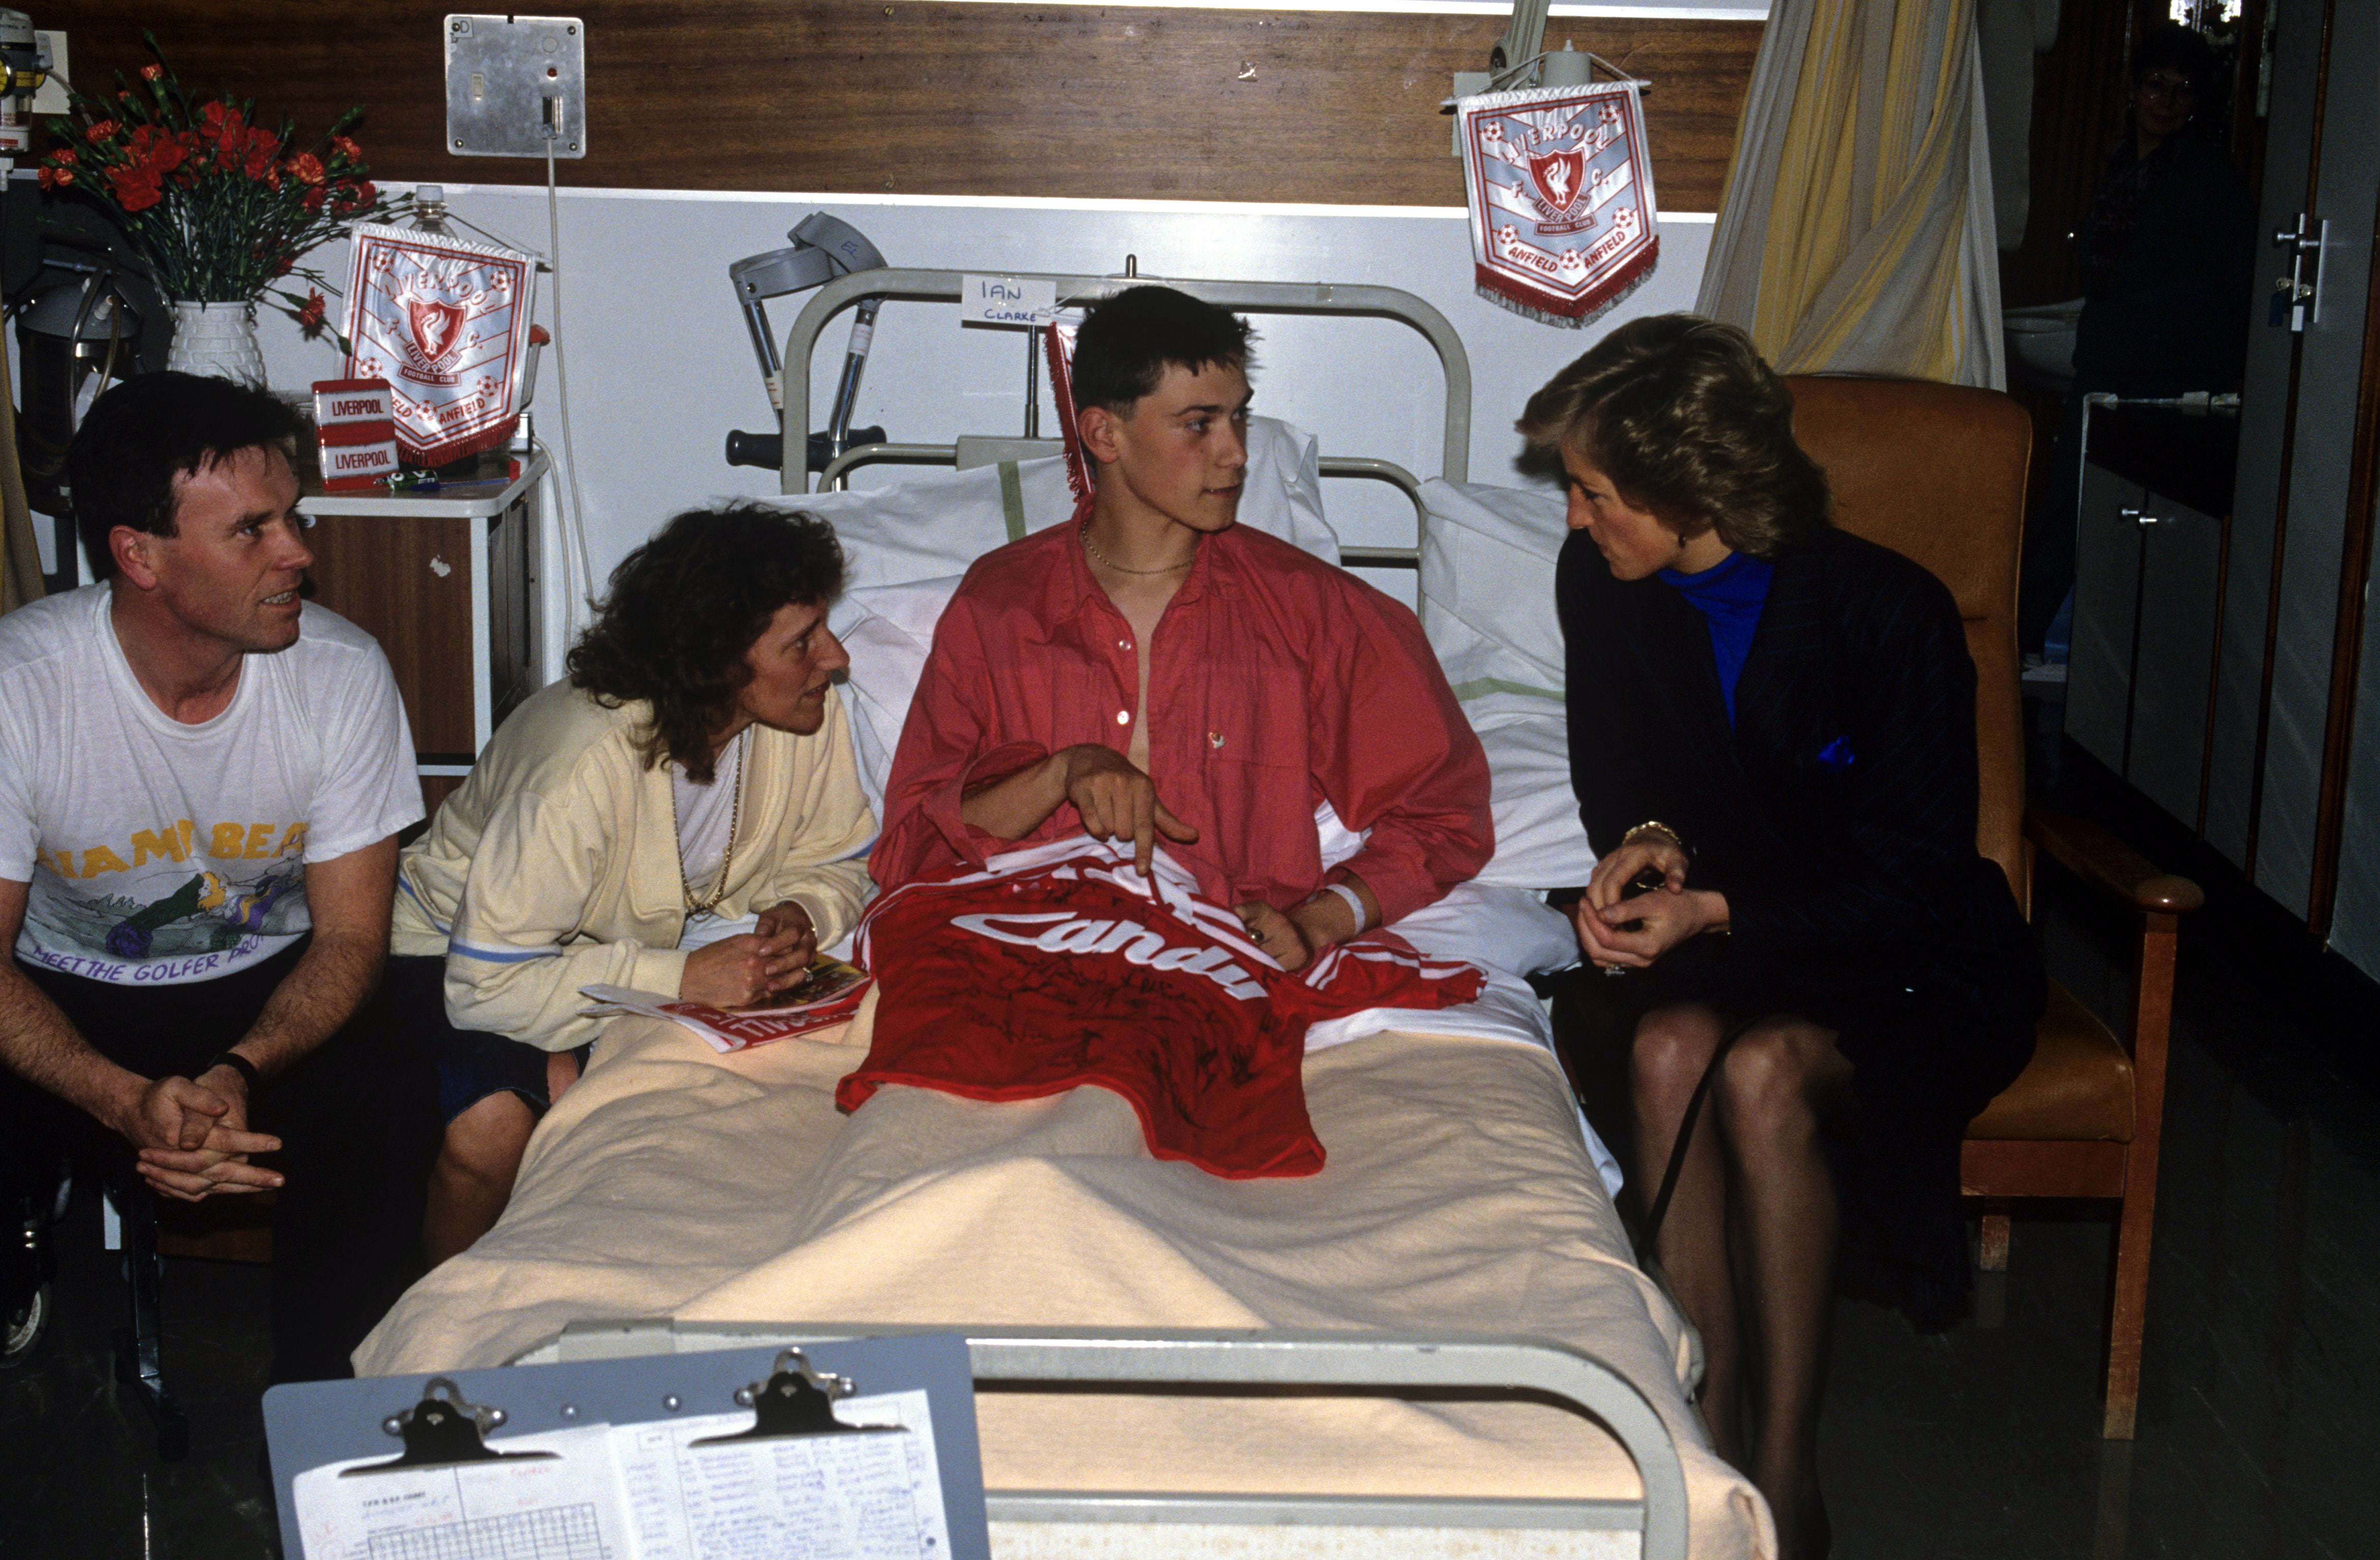 Diana pictured with Ian Clarke, a patient in hospital who had survived the Hillsborough football crowd disaster, Hallamshire Hospital, Sheffield, April 1989.